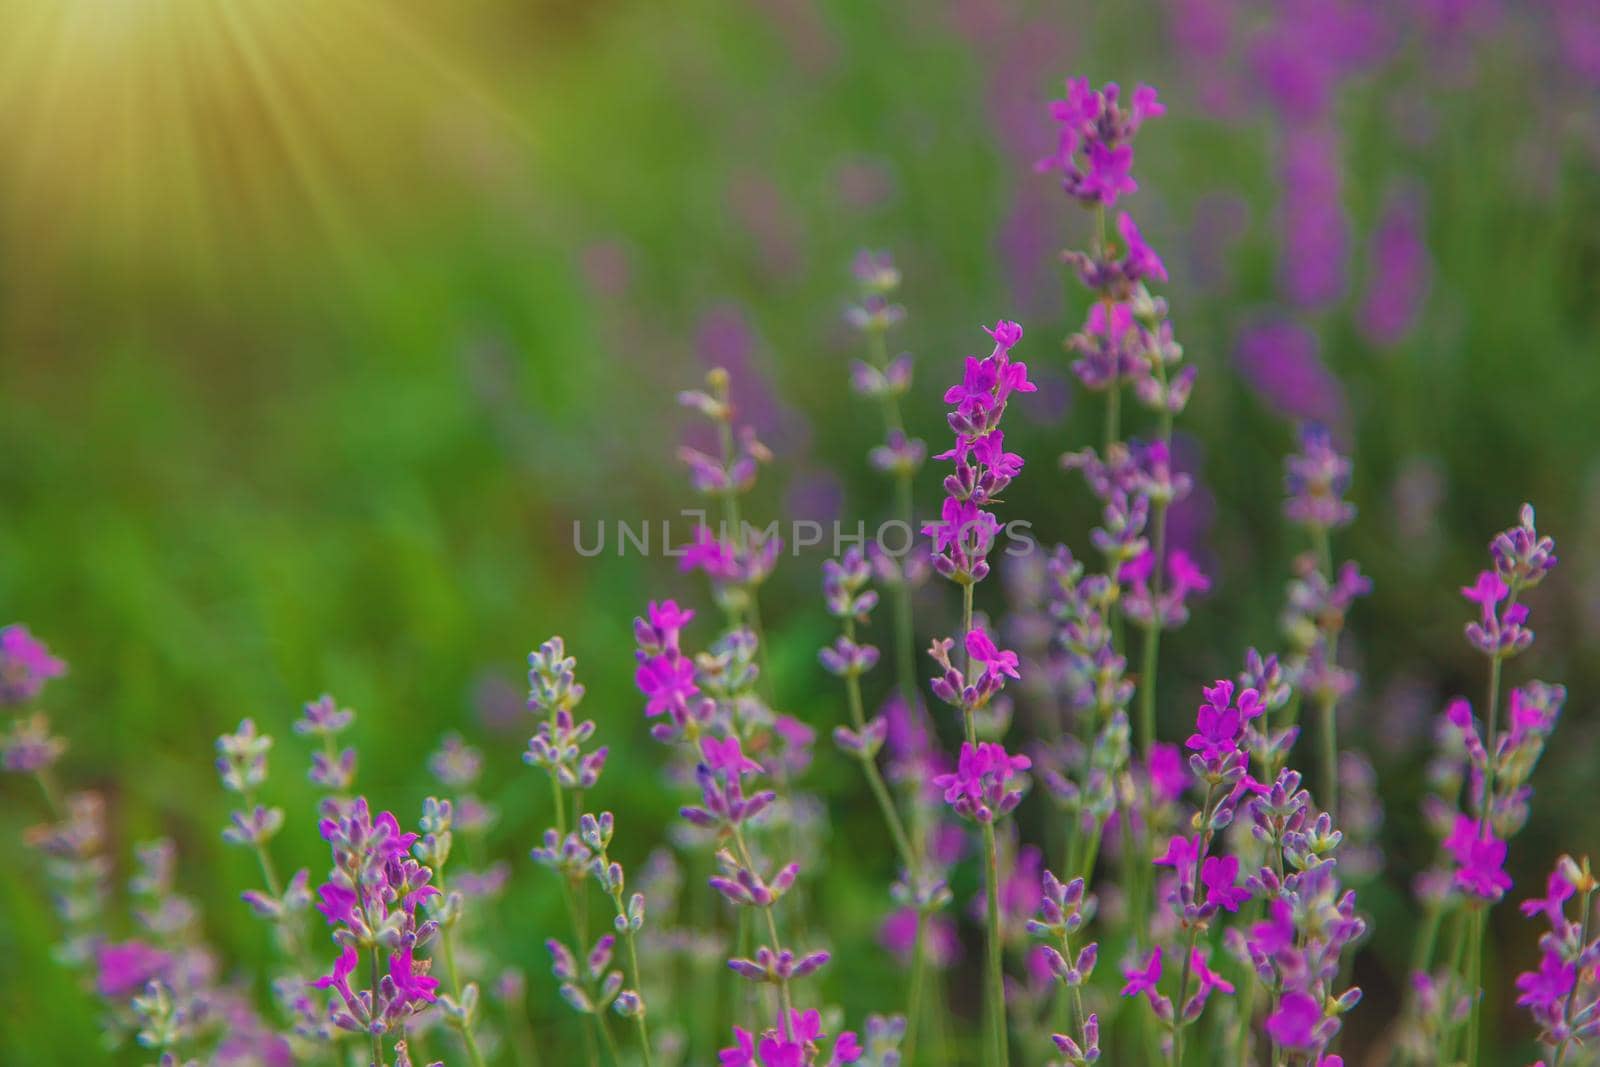 Lavender blossoms in a beautiful background field. Selective focus. Nature.